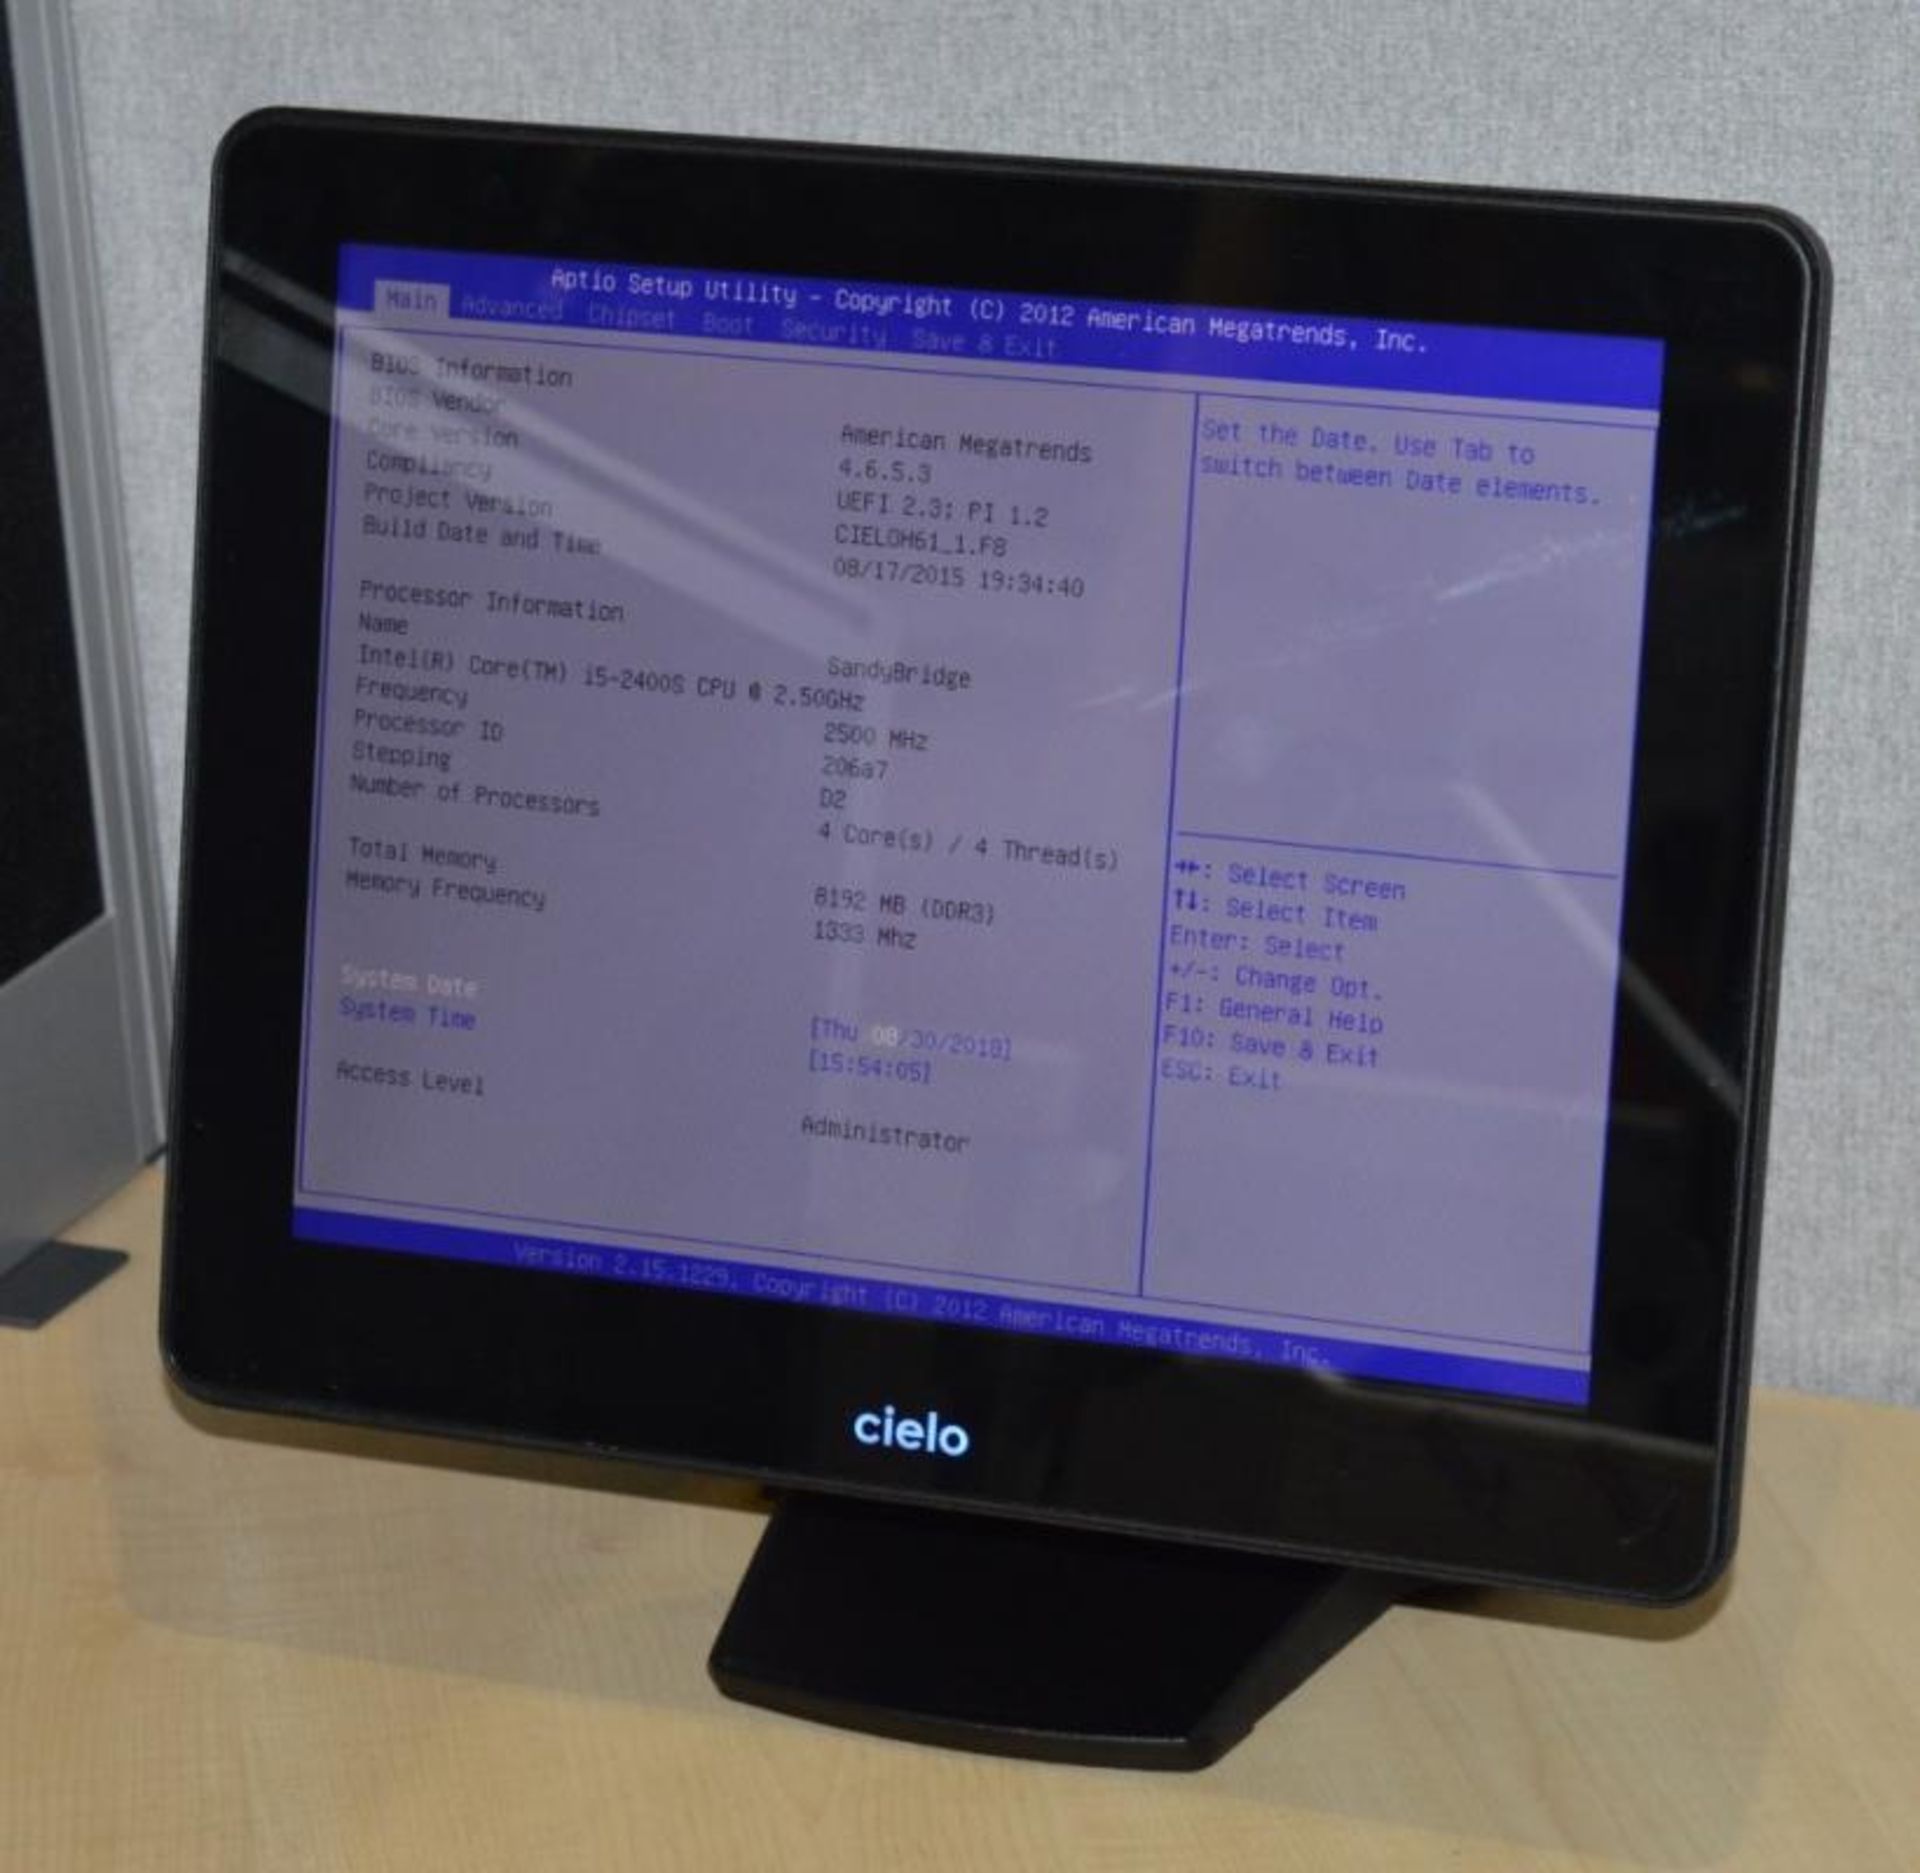 1 x Cielo AP-3615 All in One Desktop Computer POS System - Features Include 15 Inch Touch Screen, - Image 8 of 12